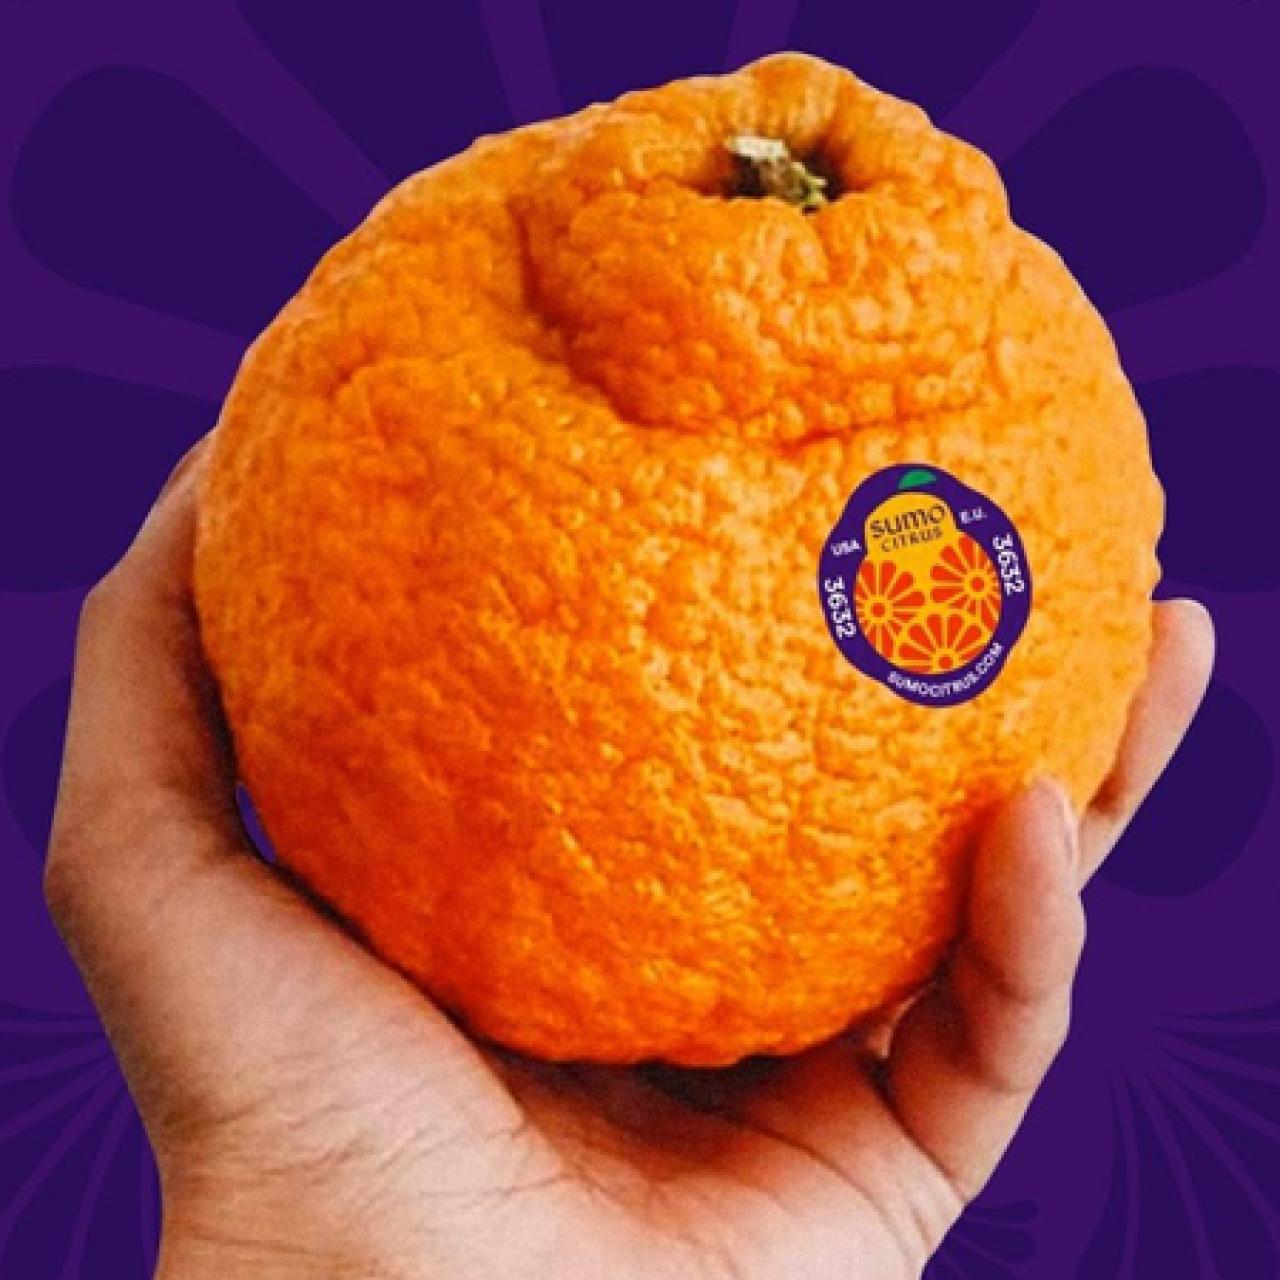 What Is A Sumo Orange And Why Is Everyone Eating Them?